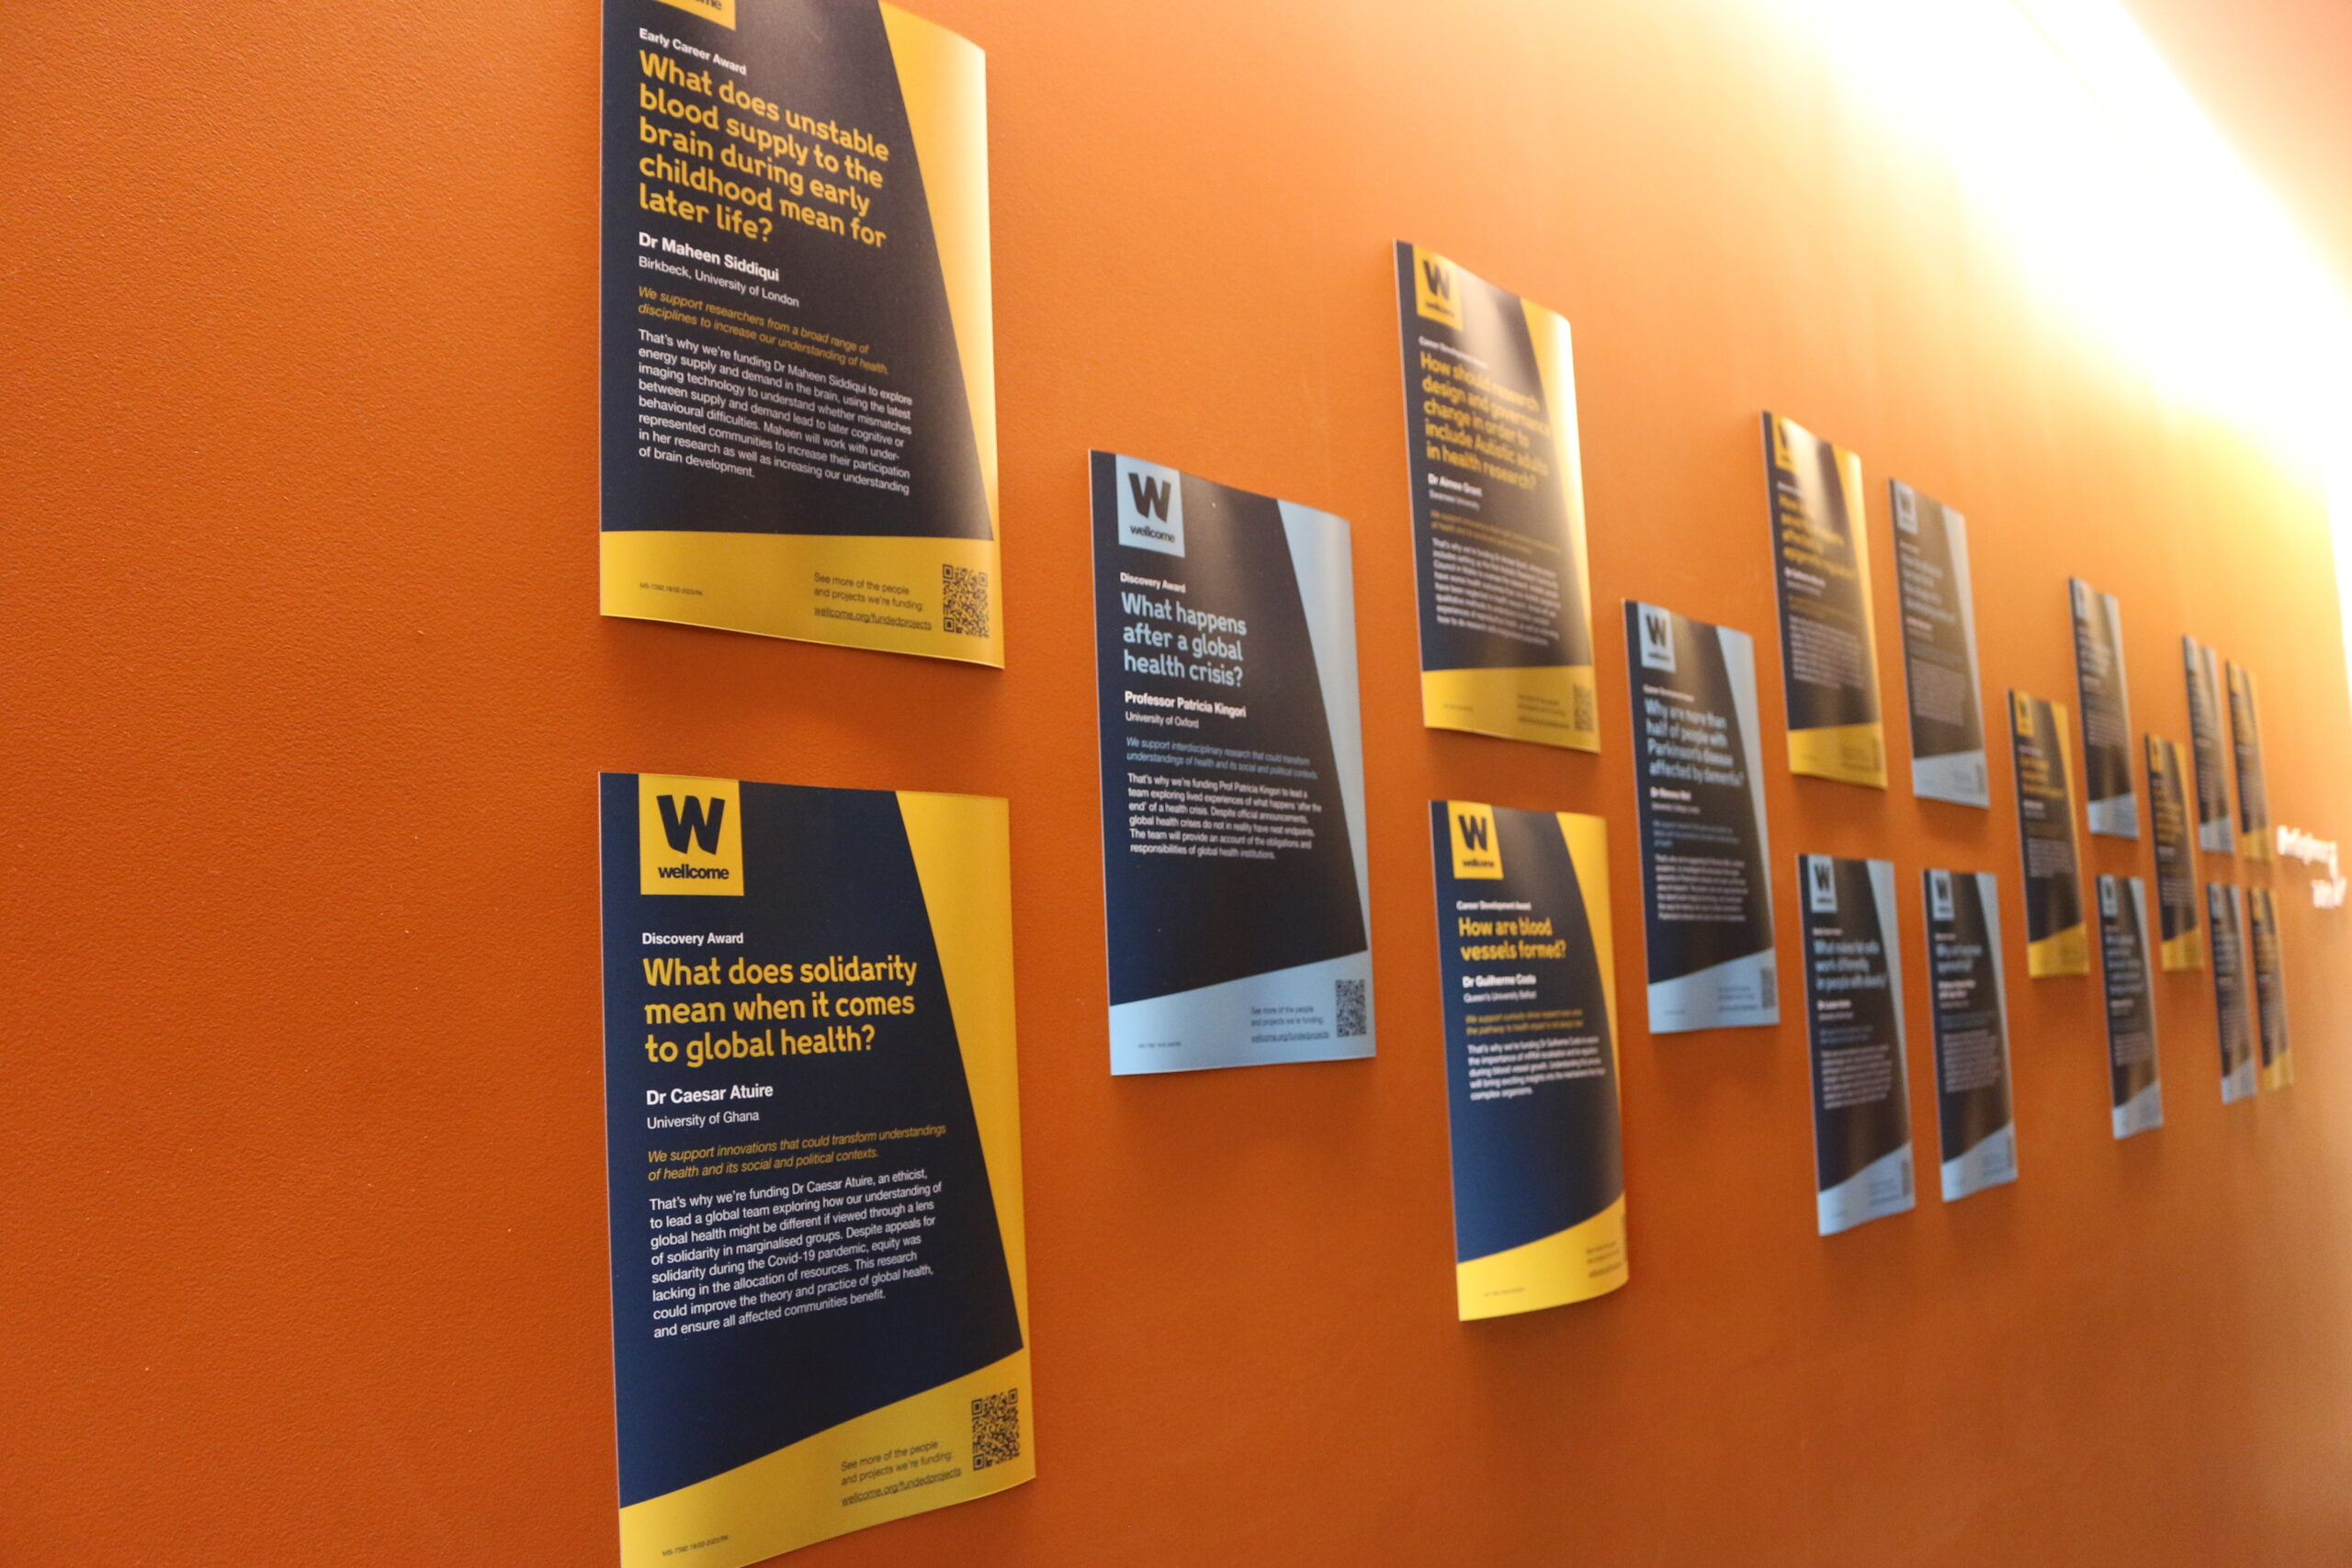 Multiple posters hanging on a wall showcasing several winners of Wellcome Awards